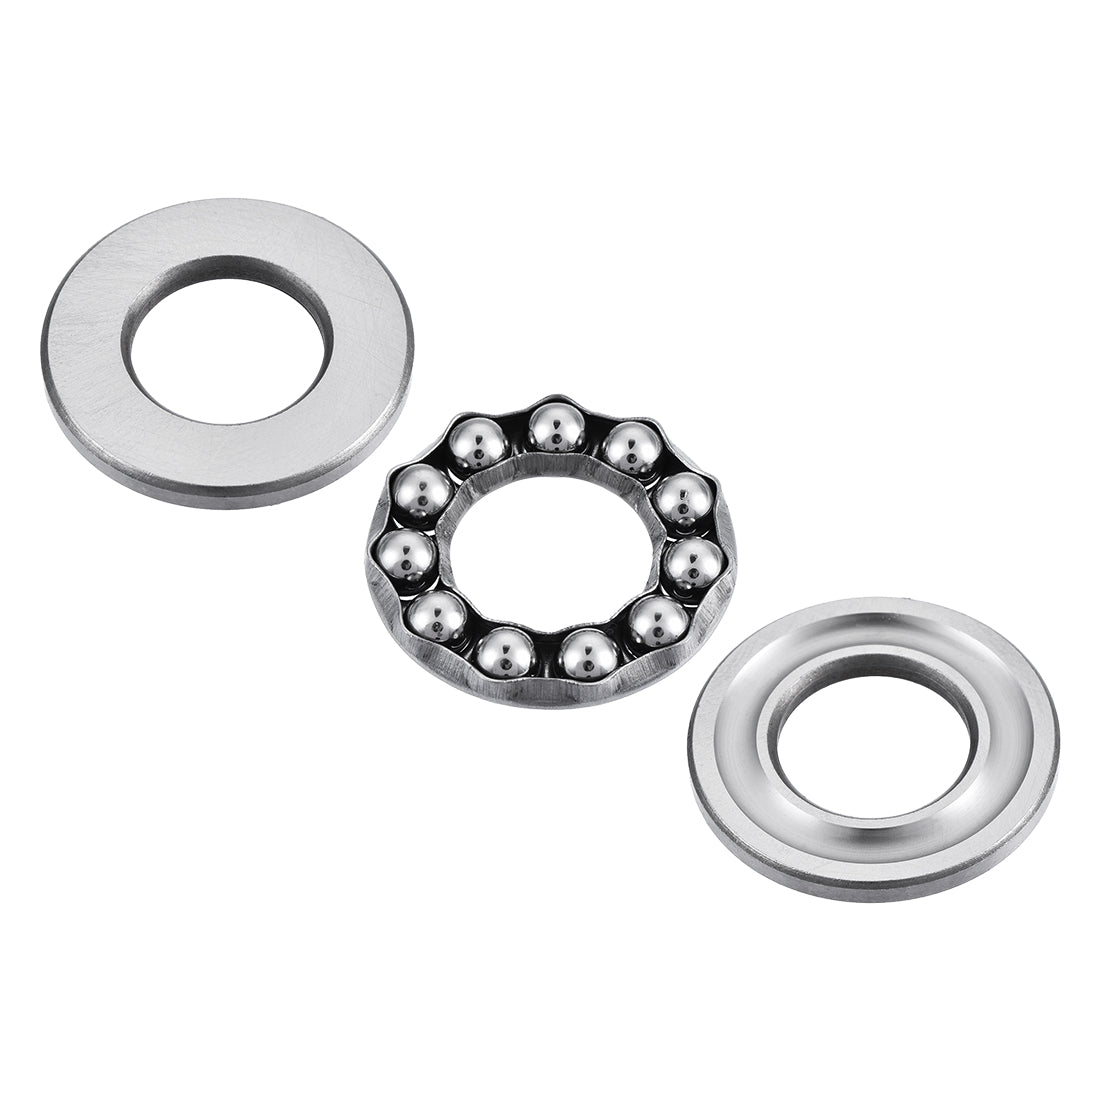 uxcell Uxcell Thrust Ball Bearings Chrome Steel Single Directions Steel Cage